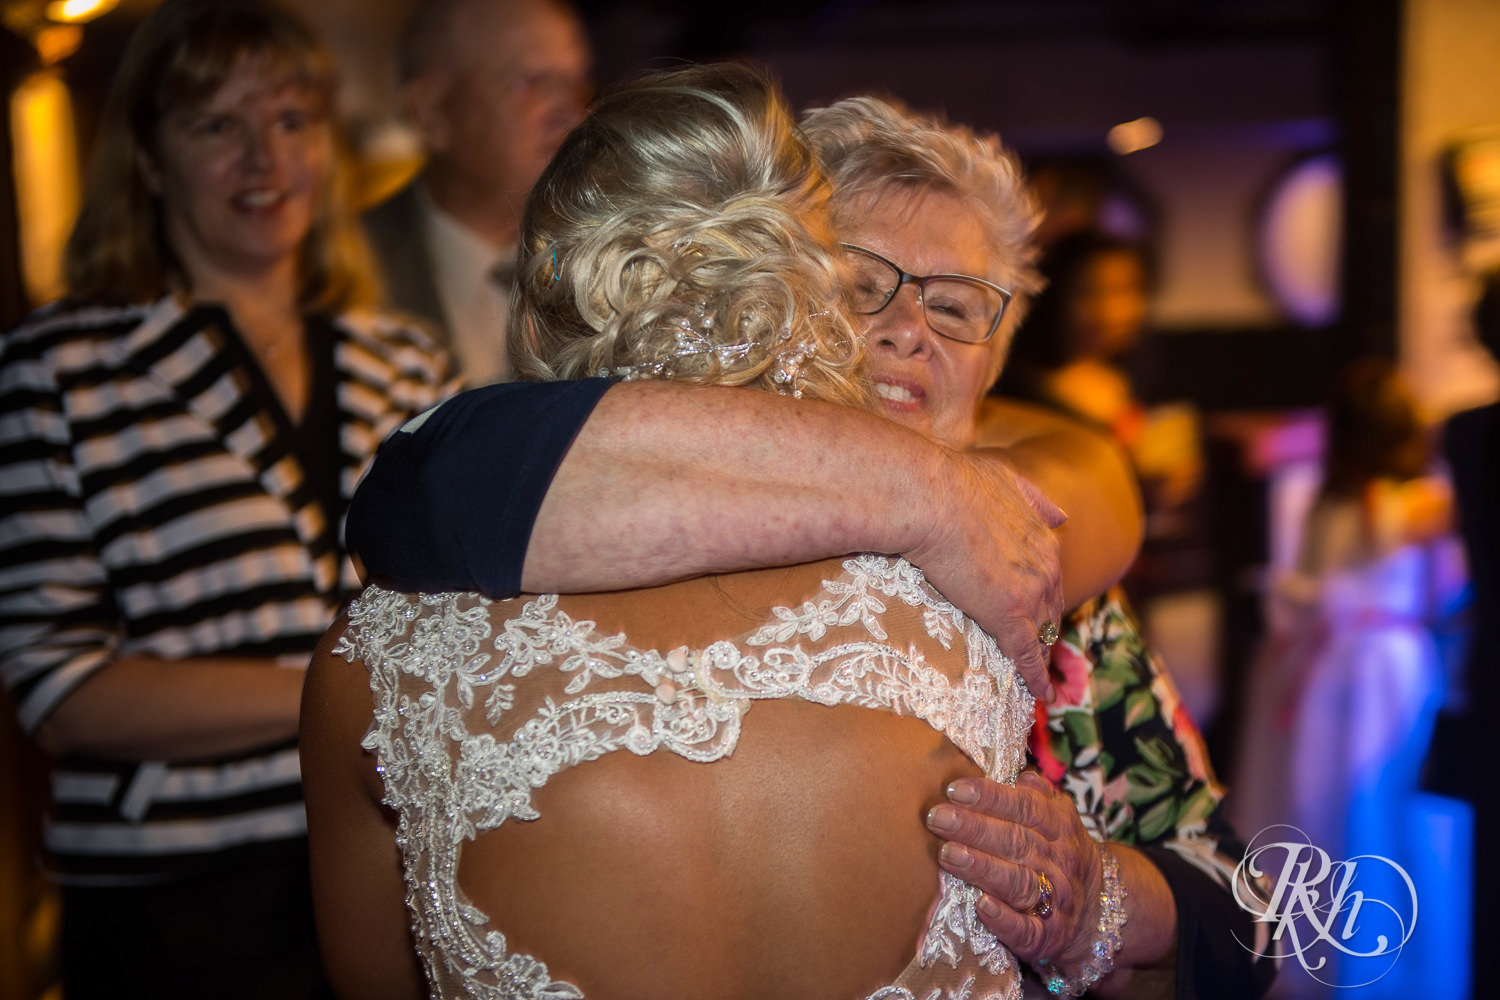 Bride and groom hug guests at the Lumber Exchange Event Center in Minneapolis, Minnesota.